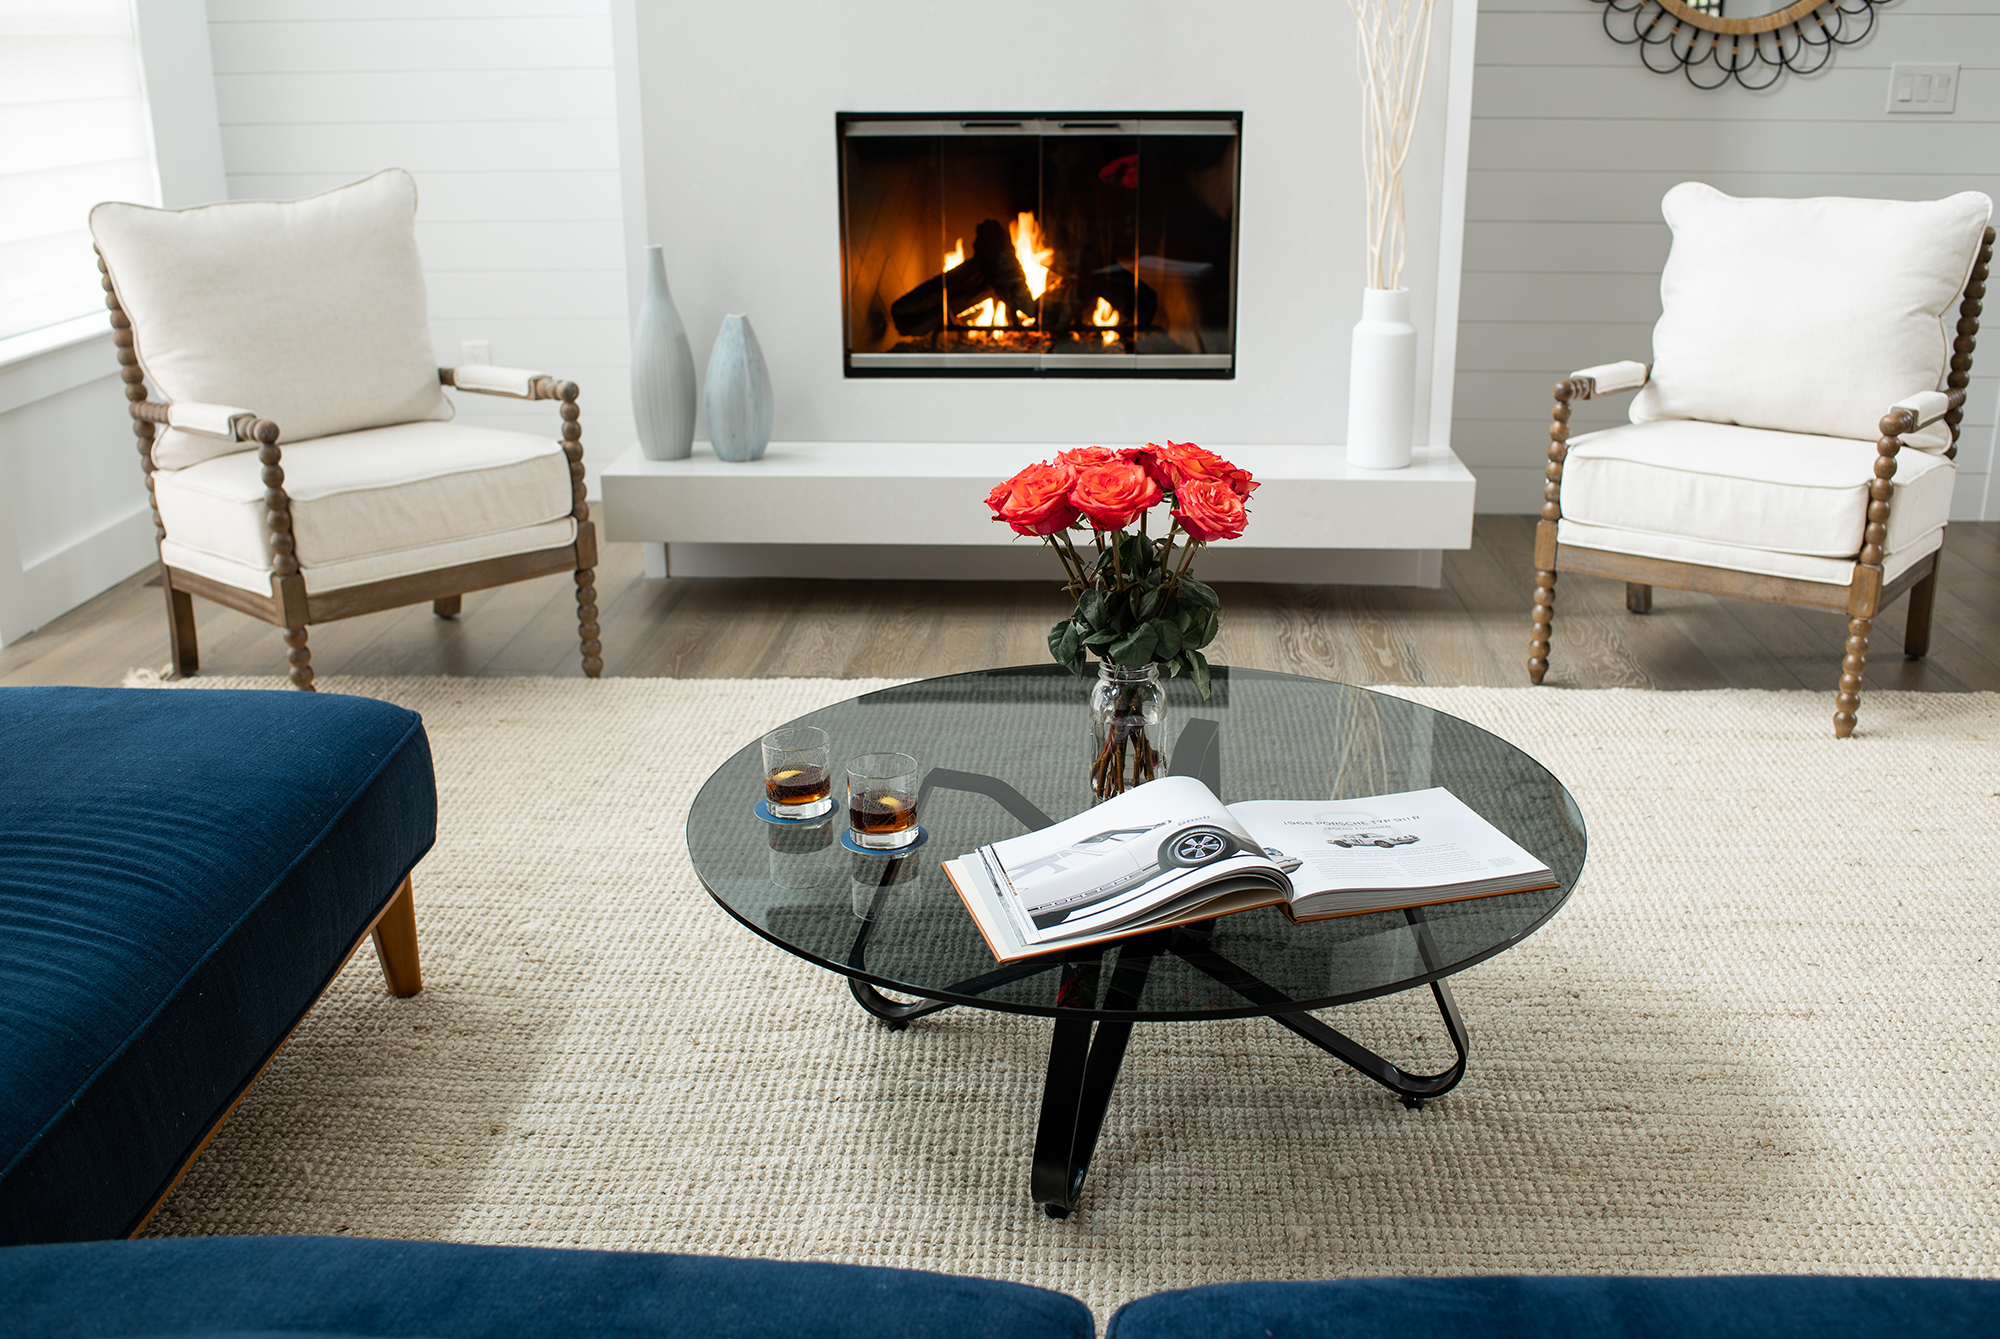 https://cdn.shopify.com/s/files/1/0555/4271/0370/files/4-7-22_Didit_Hampton_Day_24438_-_Grey_with_Fireplace.png?v=1650910380